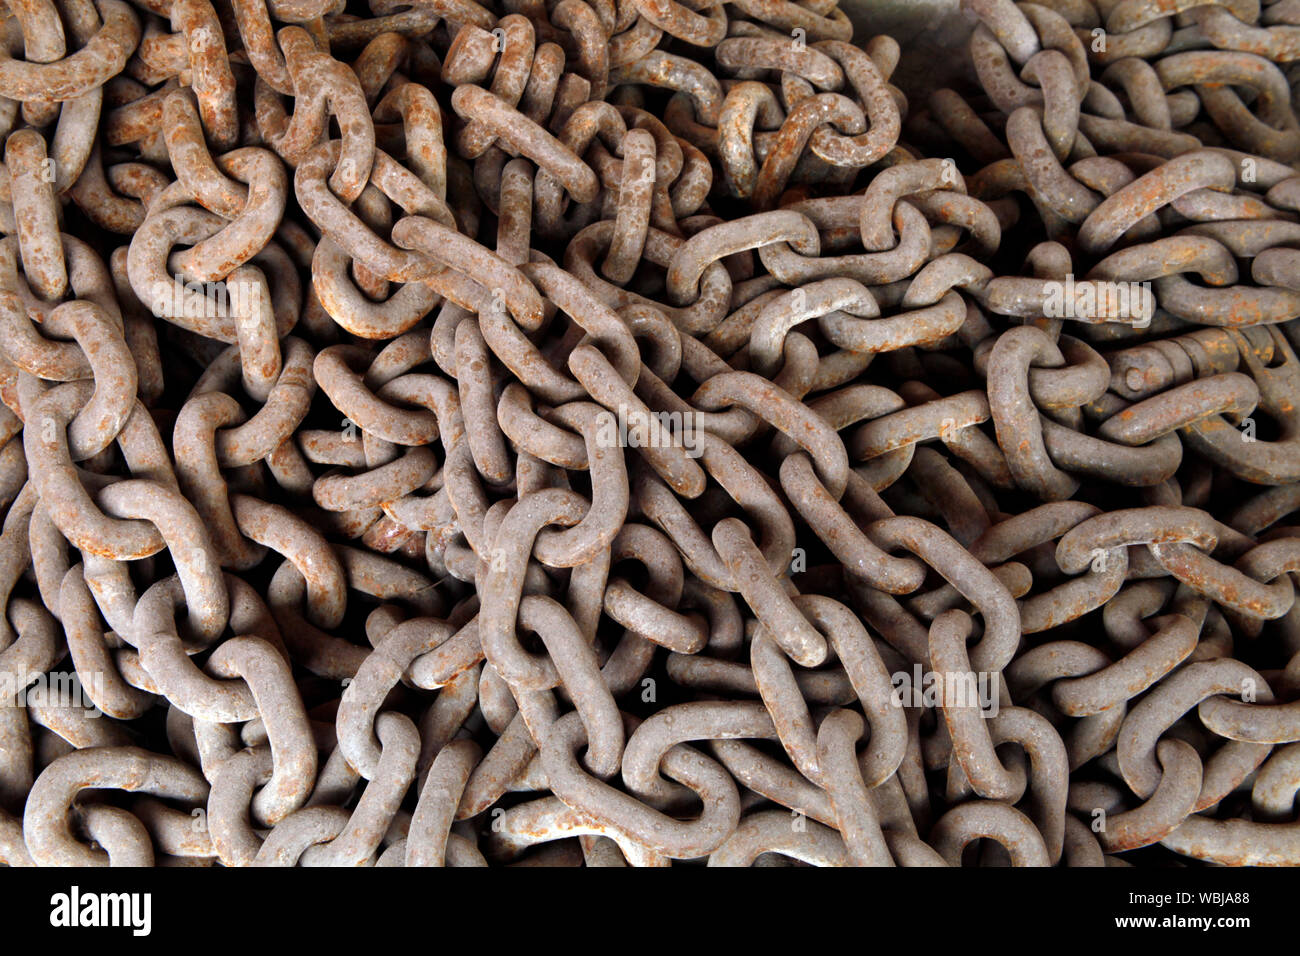 Thick cast iron chain detail Stock Photo by ©thomasmales 31239829